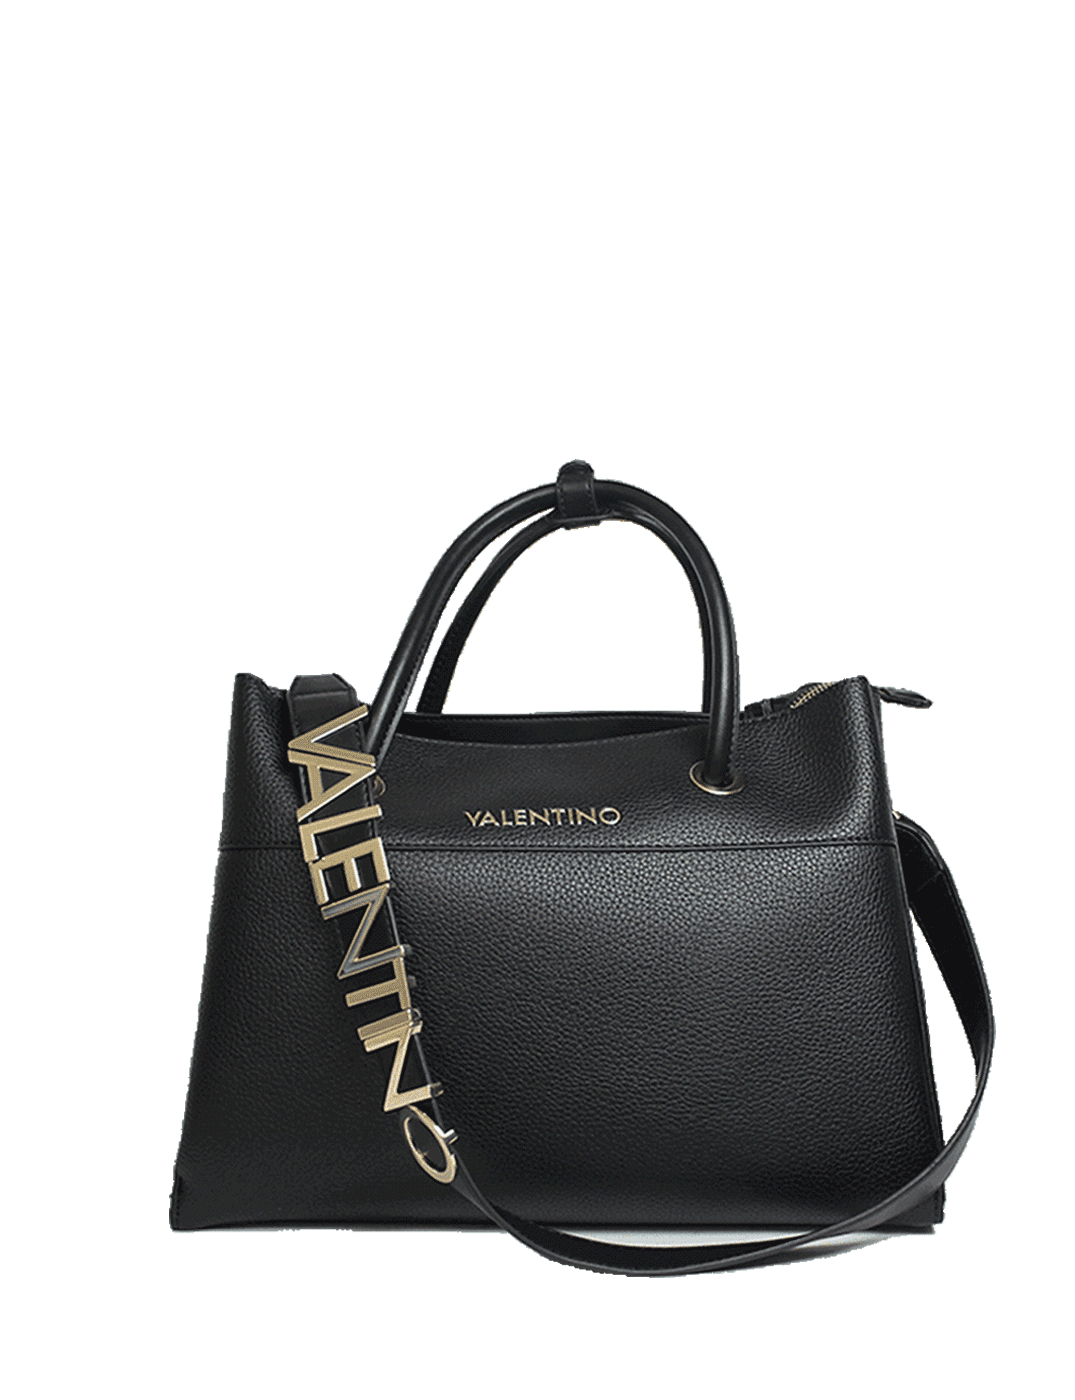 Alexia Tote Bag With Gold Logo Details Black / White | Rodem Shoes